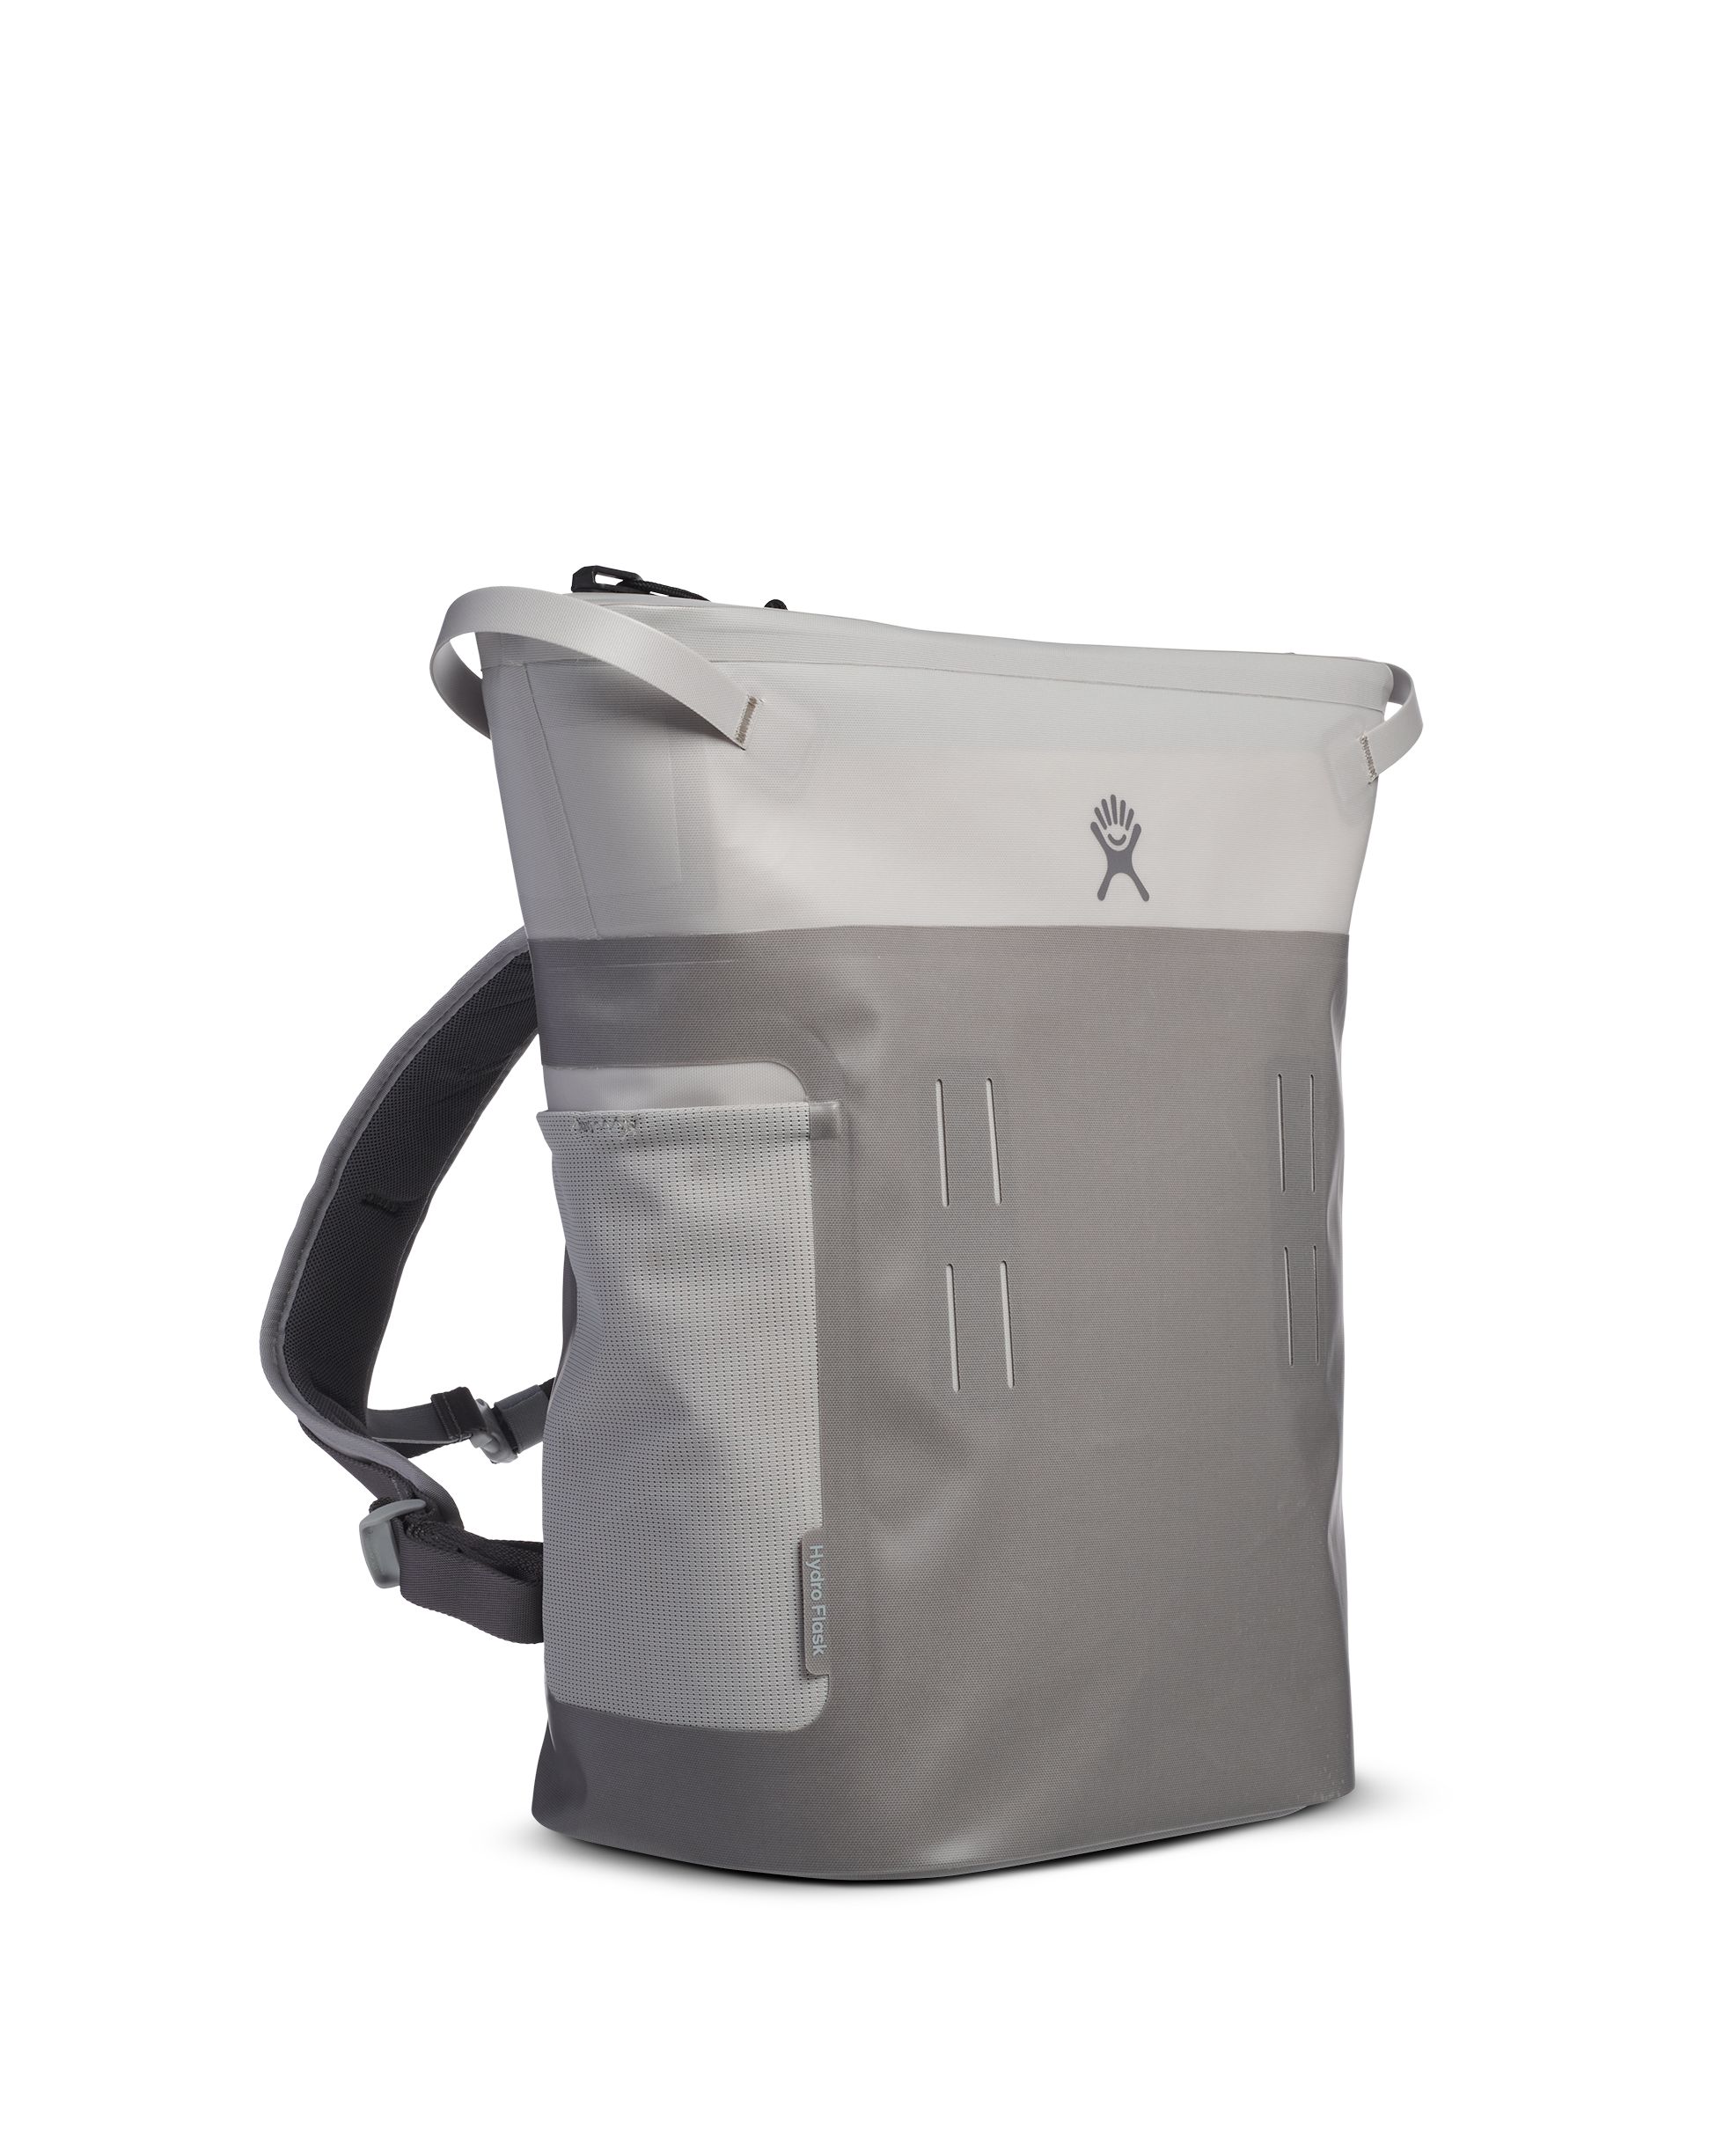 Image of Hydroflask 20L Day Escape Backpack Soft Cooler